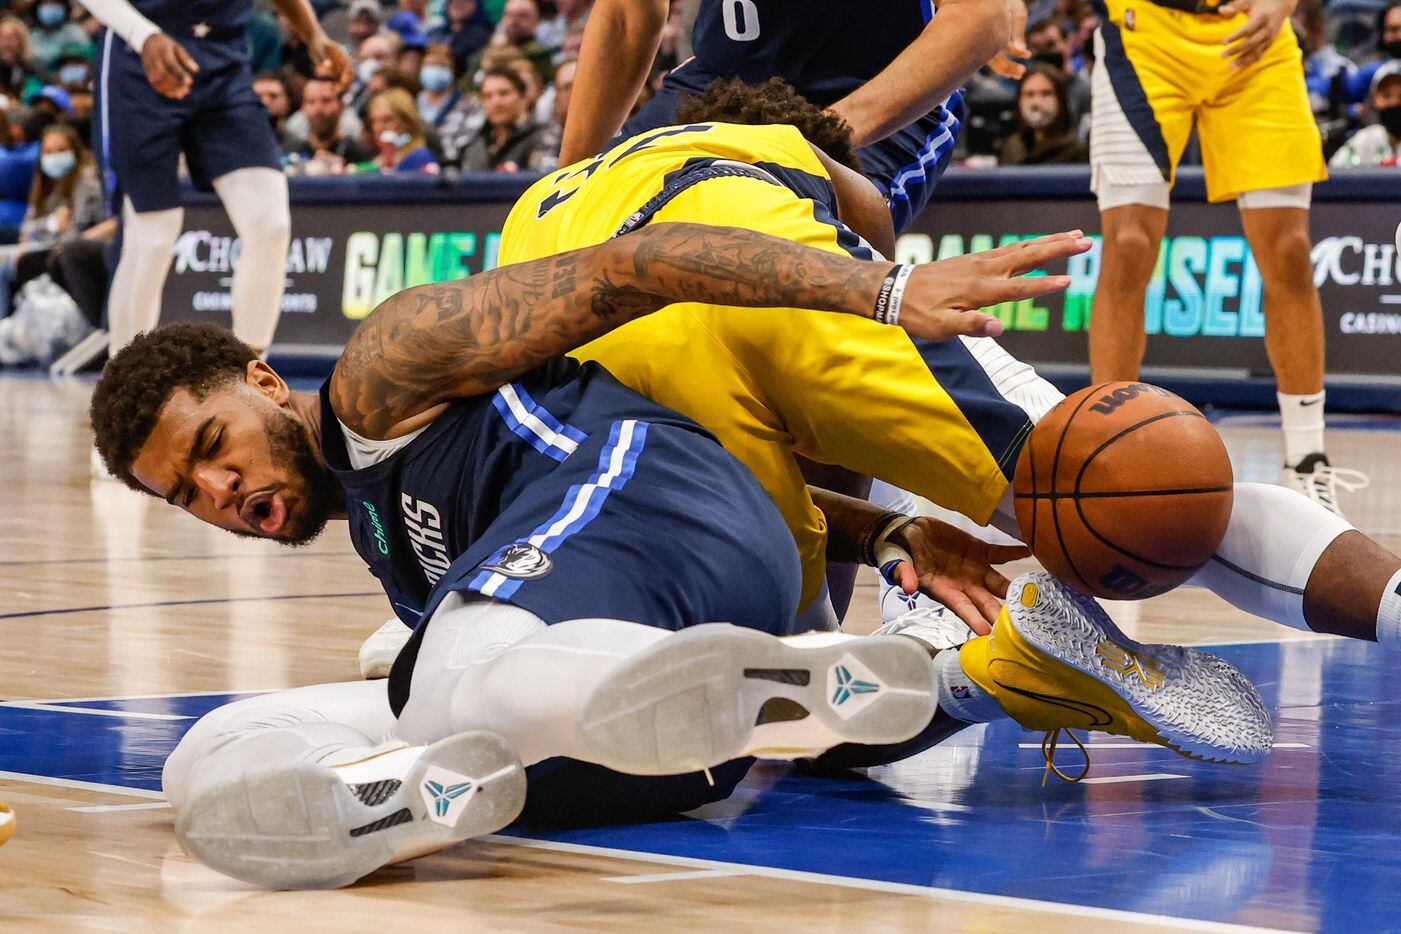 Dallas Mavericks forward Marquese Chriss (32) fights for the ball with Indiana Pacers guard Terry Taylor (32) during the second half at the American Airlines Center in Dallas on Saturday, January 29, 2022.